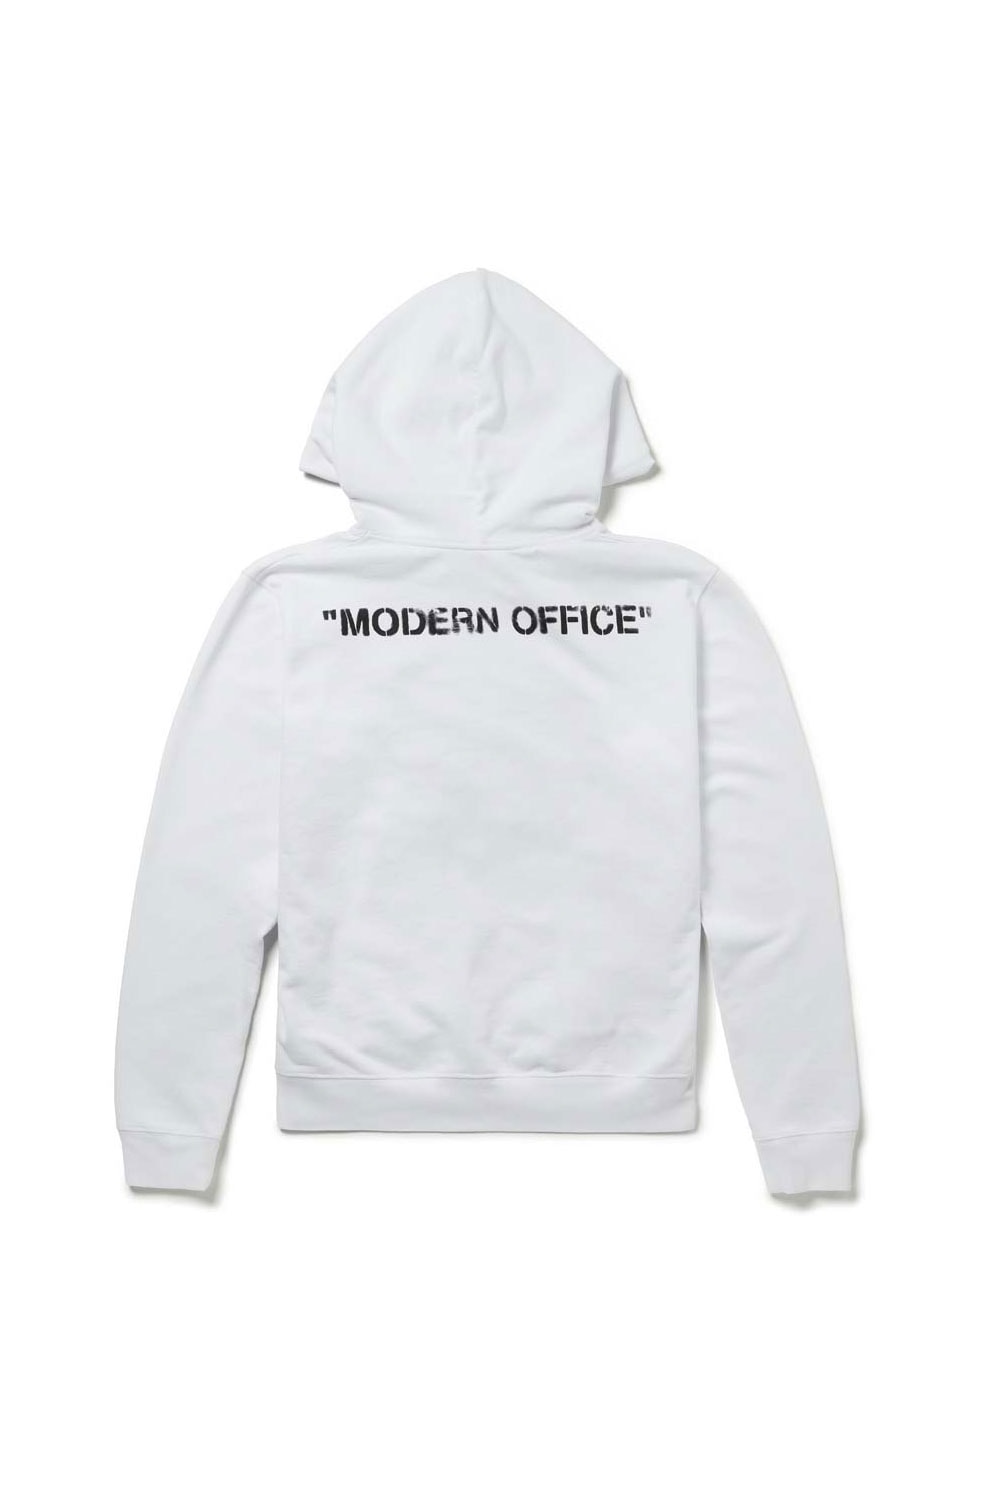 Off-White™ Mr Porter Capsule Collection "Modern Office" Details Collab Collaborations Lookbooks